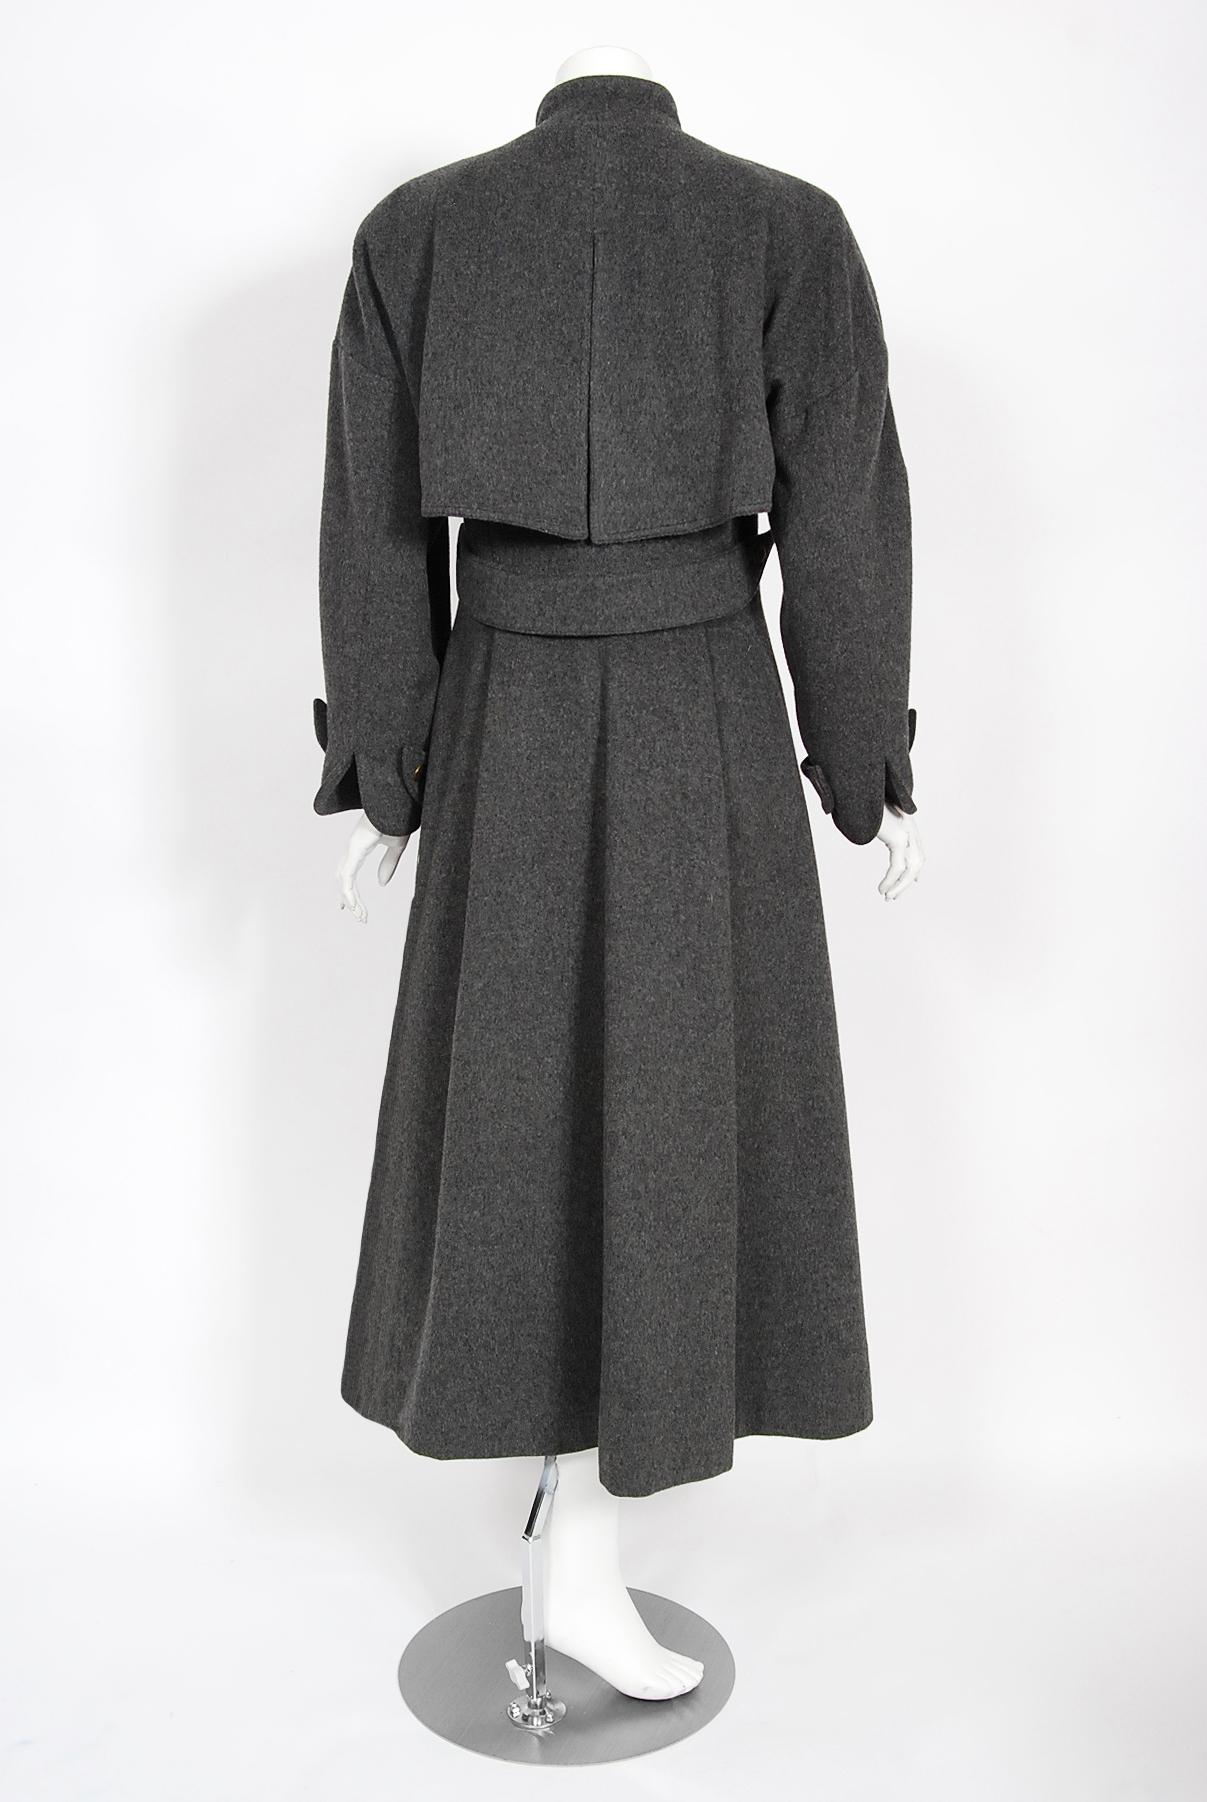 Vintage 1990s Karl Lagerfeld Charcoal Gray Wool Double Breasted Princess Coat  6